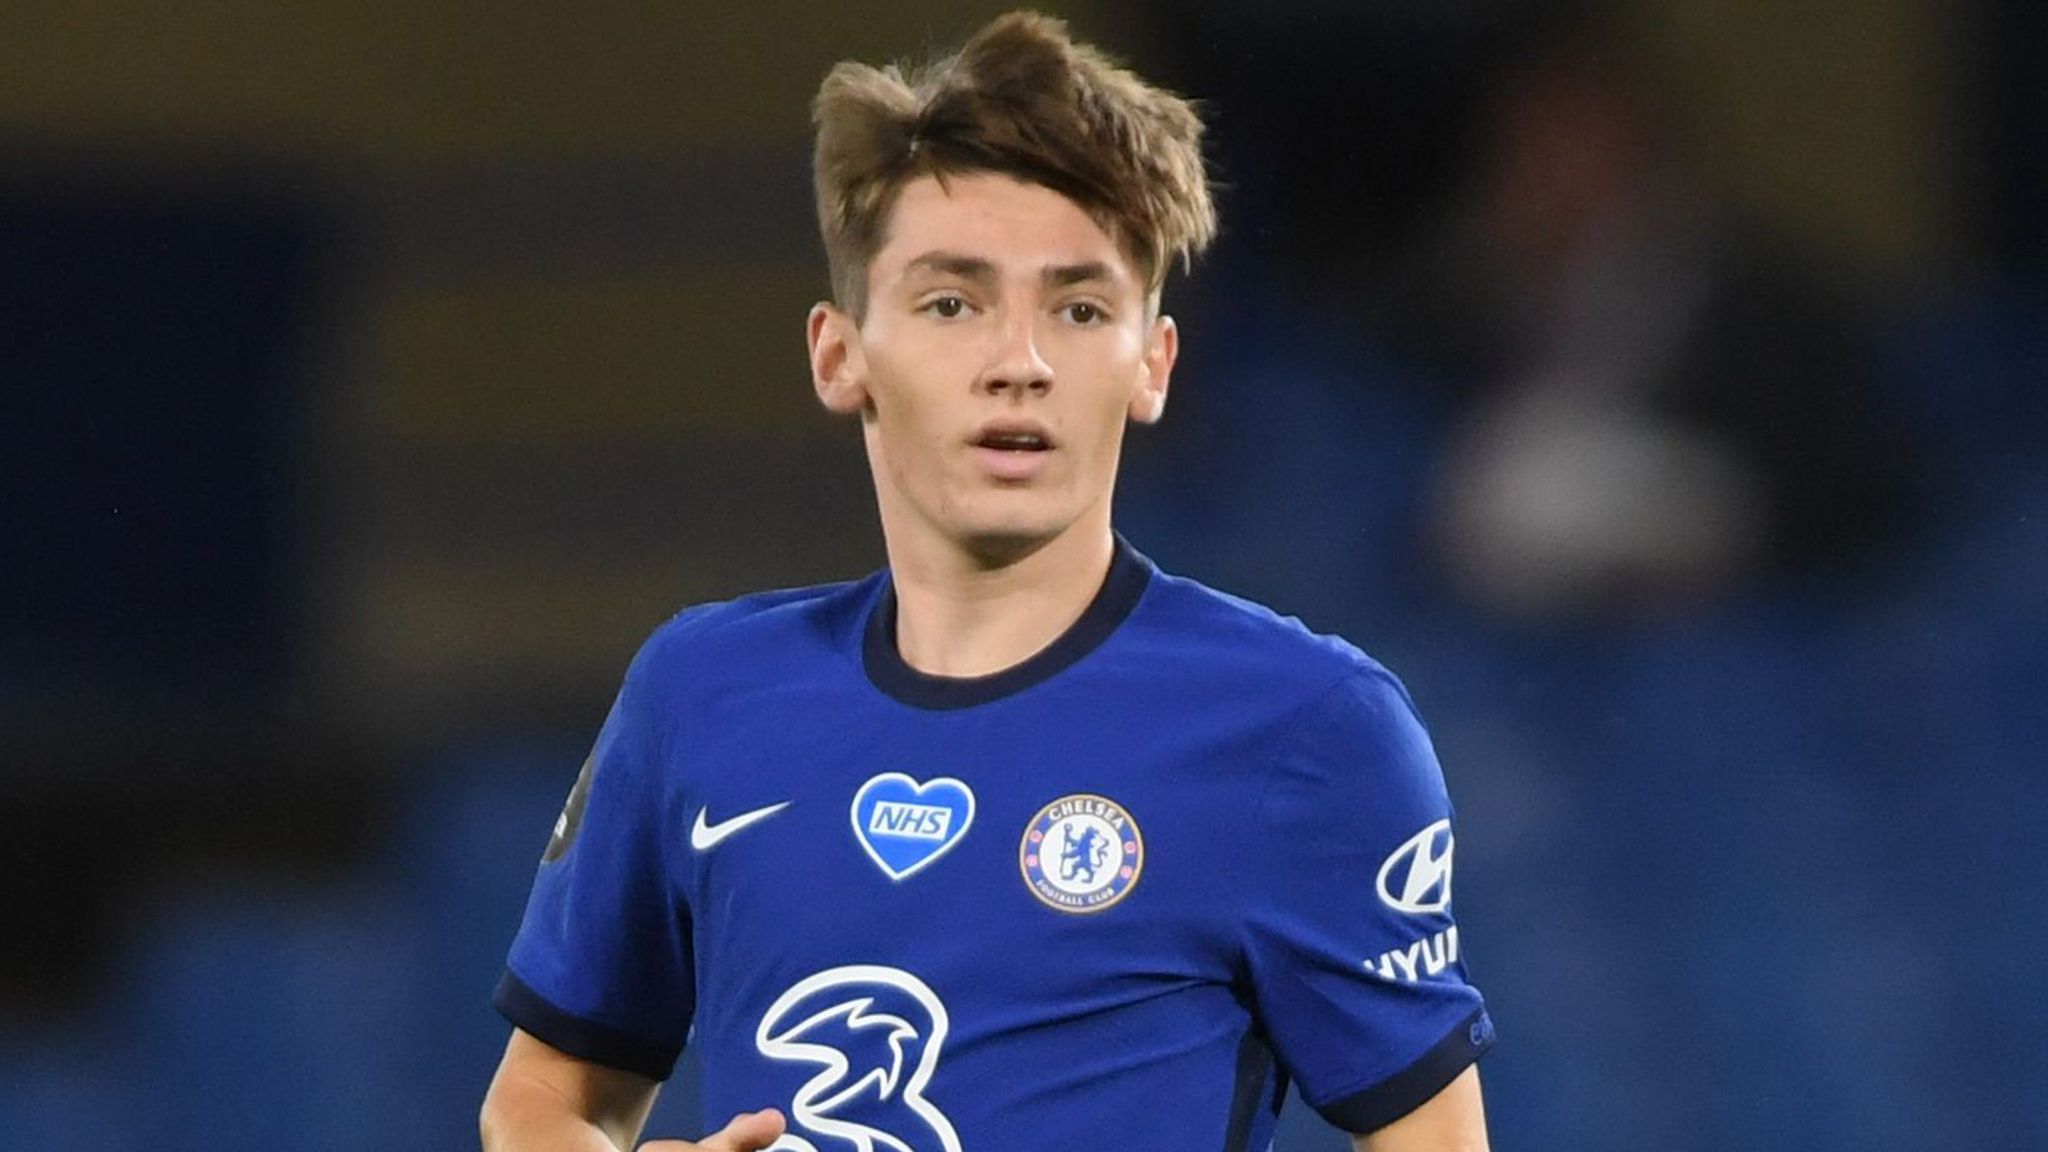 The 21-year old son of father (?) and mother(?) Billy Gilmour in 2022 photo. Billy Gilmour earned a 0.45 million dollar salary - leaving the net worth at  million in 2022